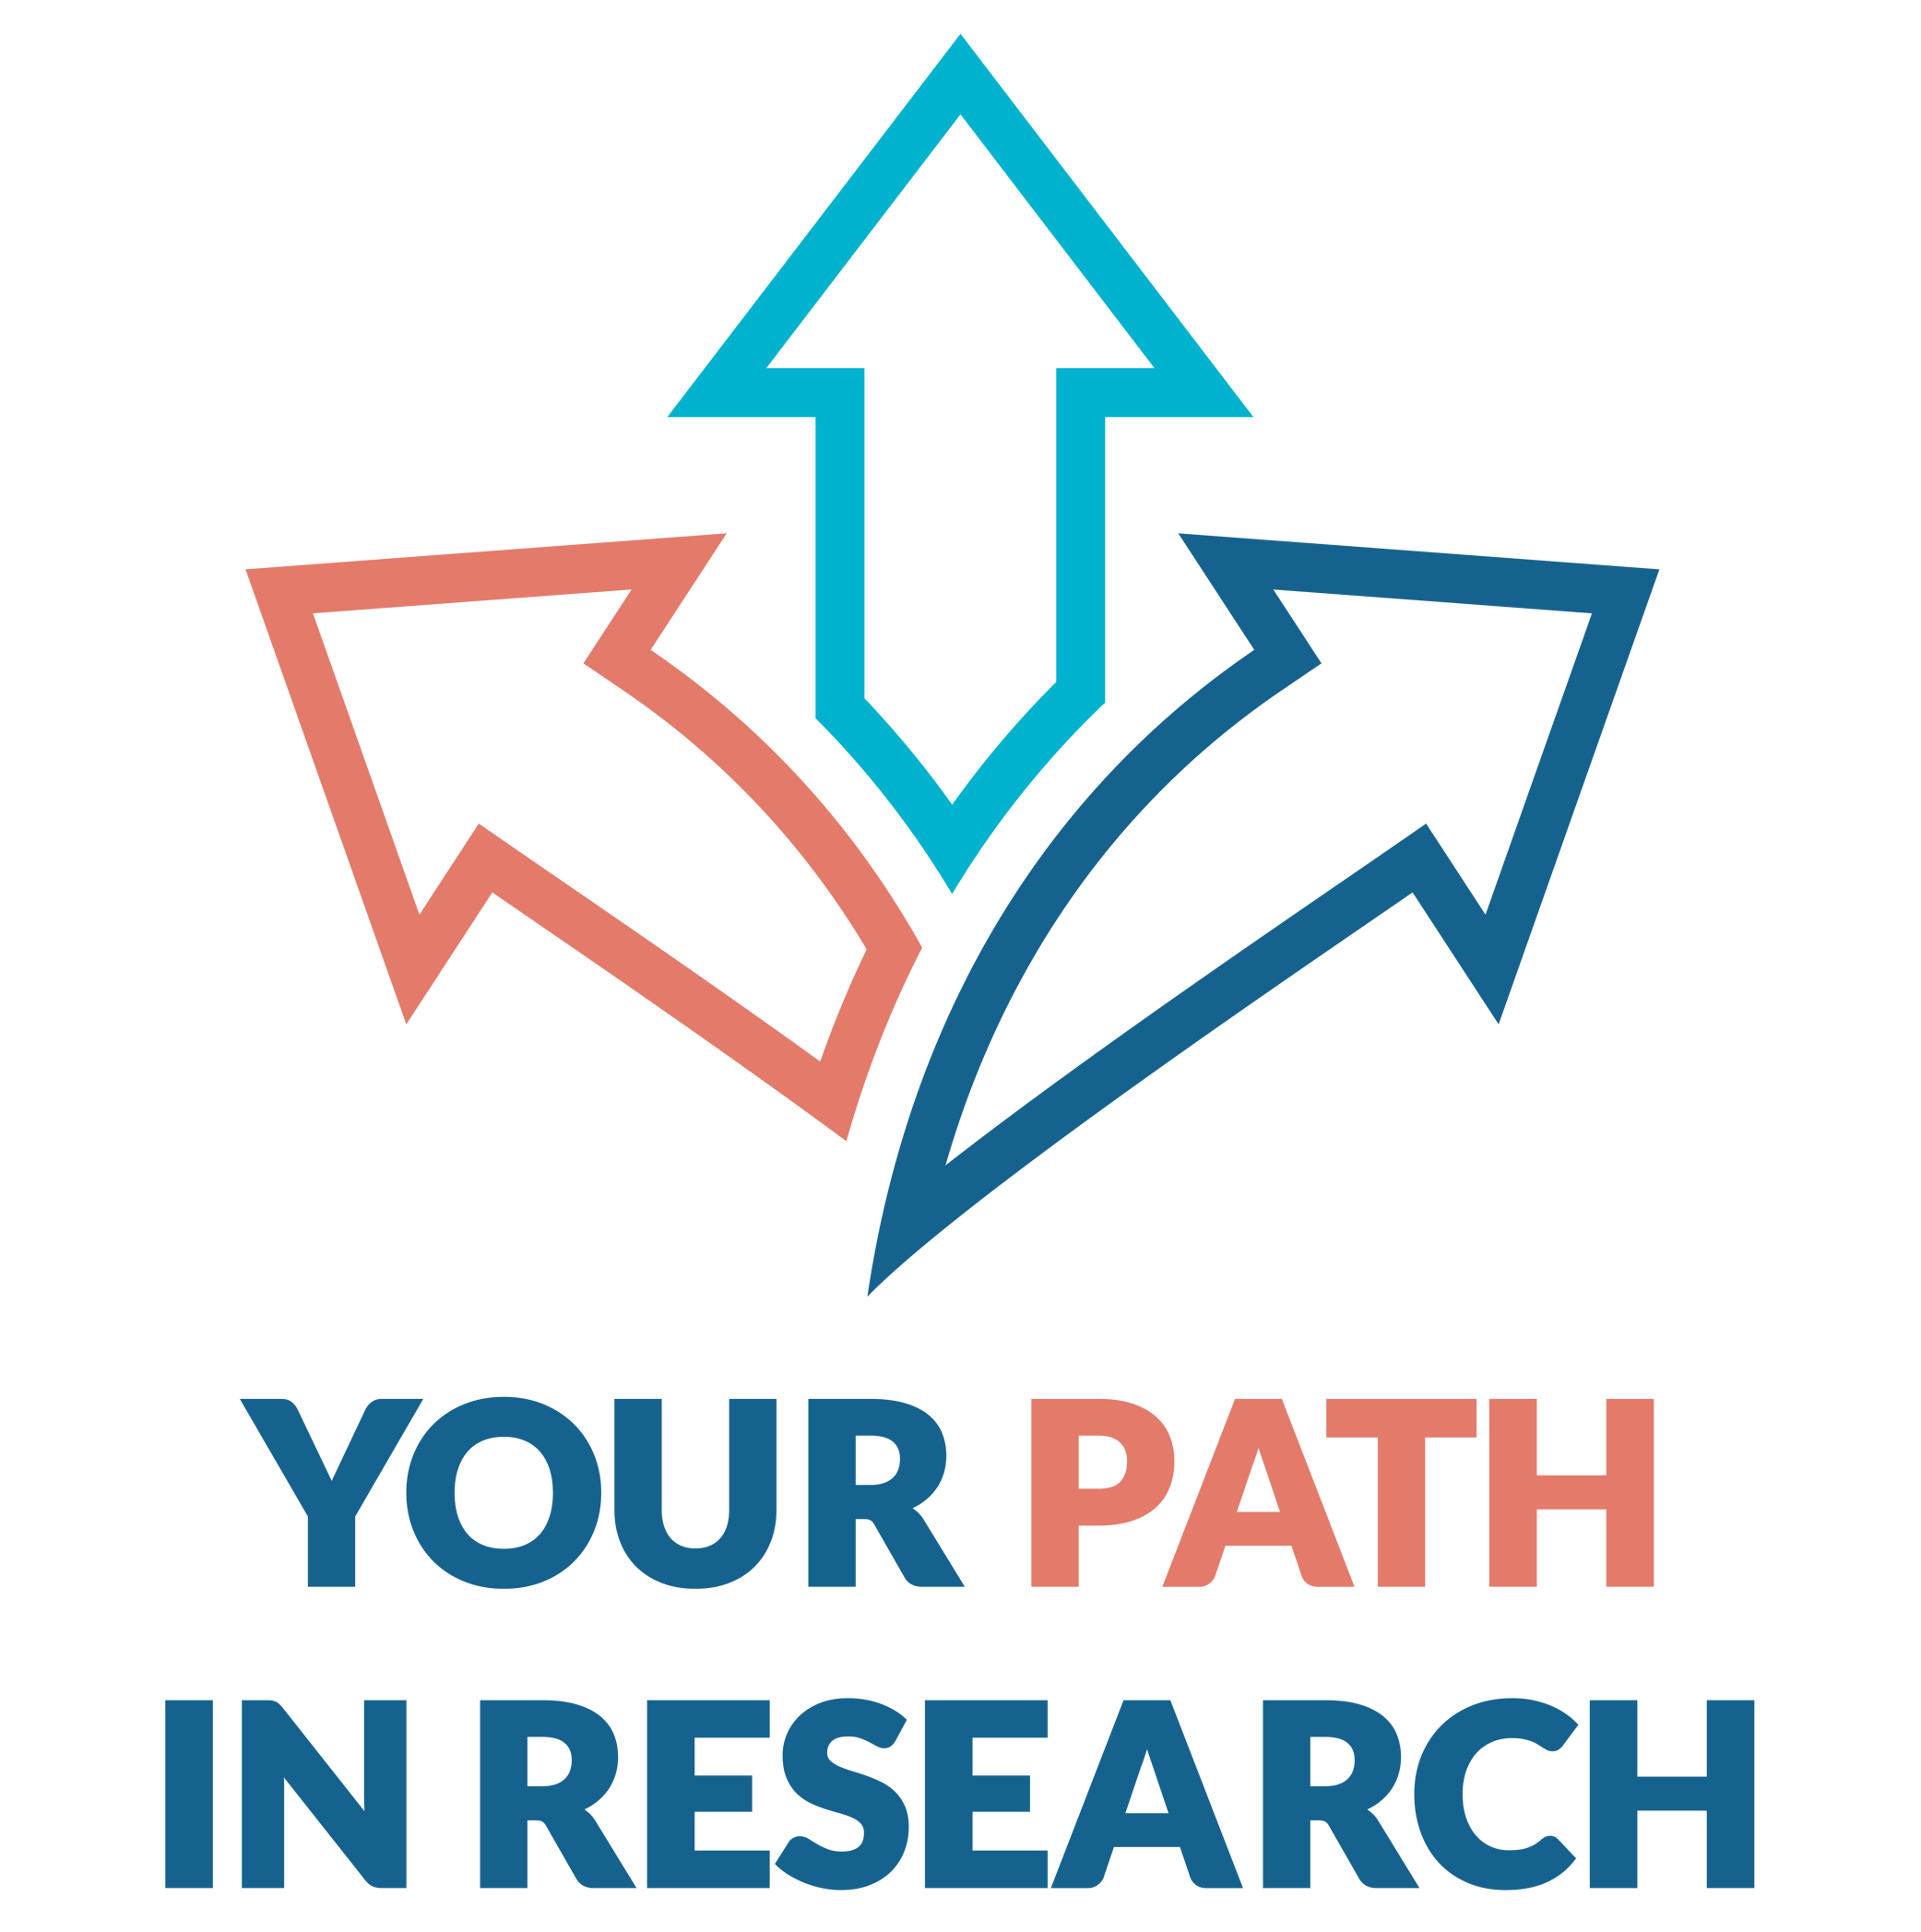 Your Path in Research, blue and orange text sitting underneath an orange, turquoise and dark blue set of arrows.